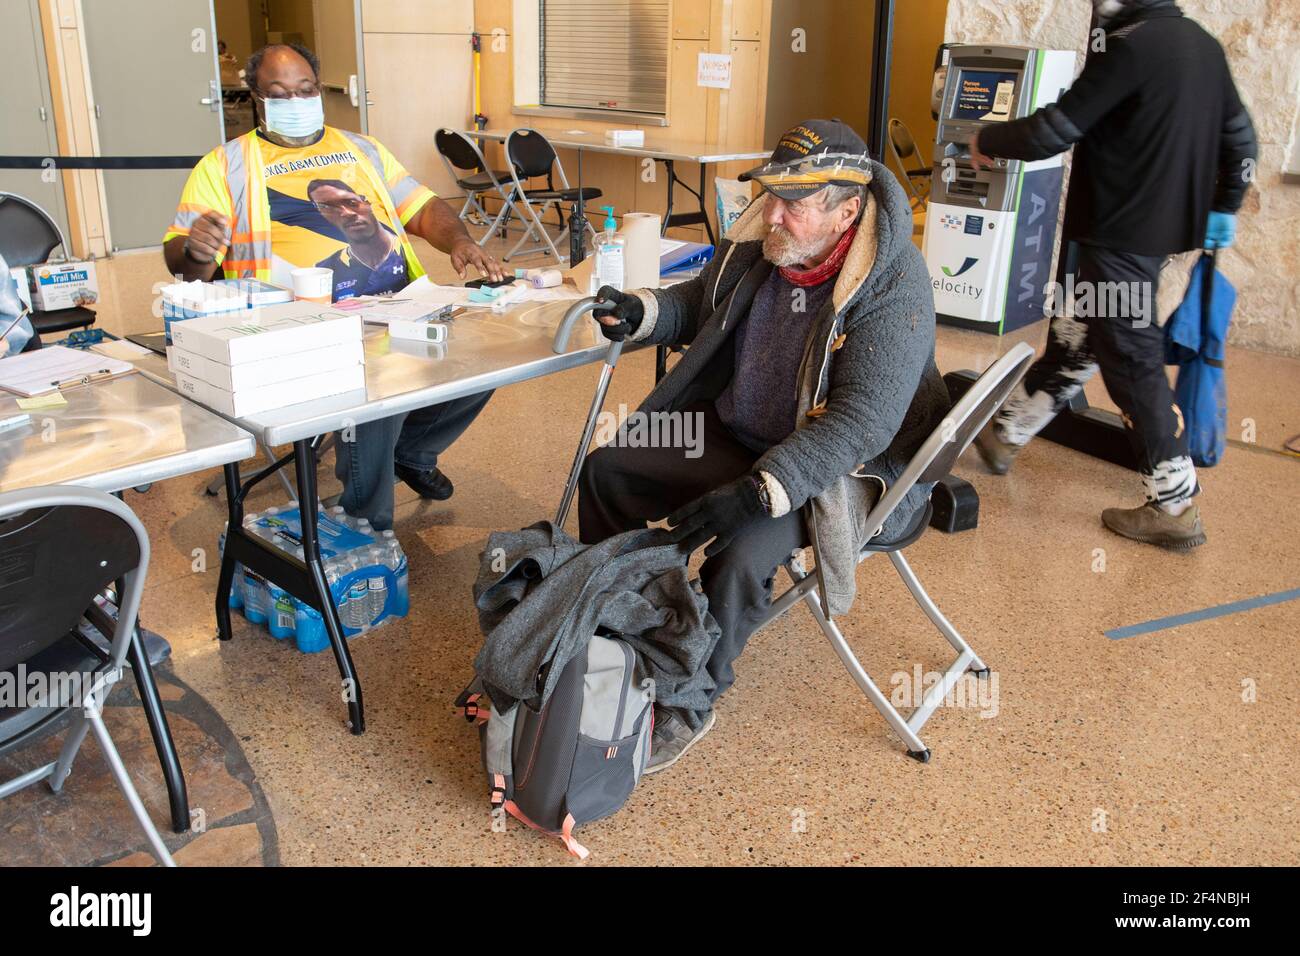 Austin, TX USA Feb 20, 2021:  63-year-old homeless veteran checks in at a city-run shelter in south Austin to house habitually homeless Austinites. Many were left with no place to go during the recent winter storms in Texas. ©Bob Daemmrich Stock Photo